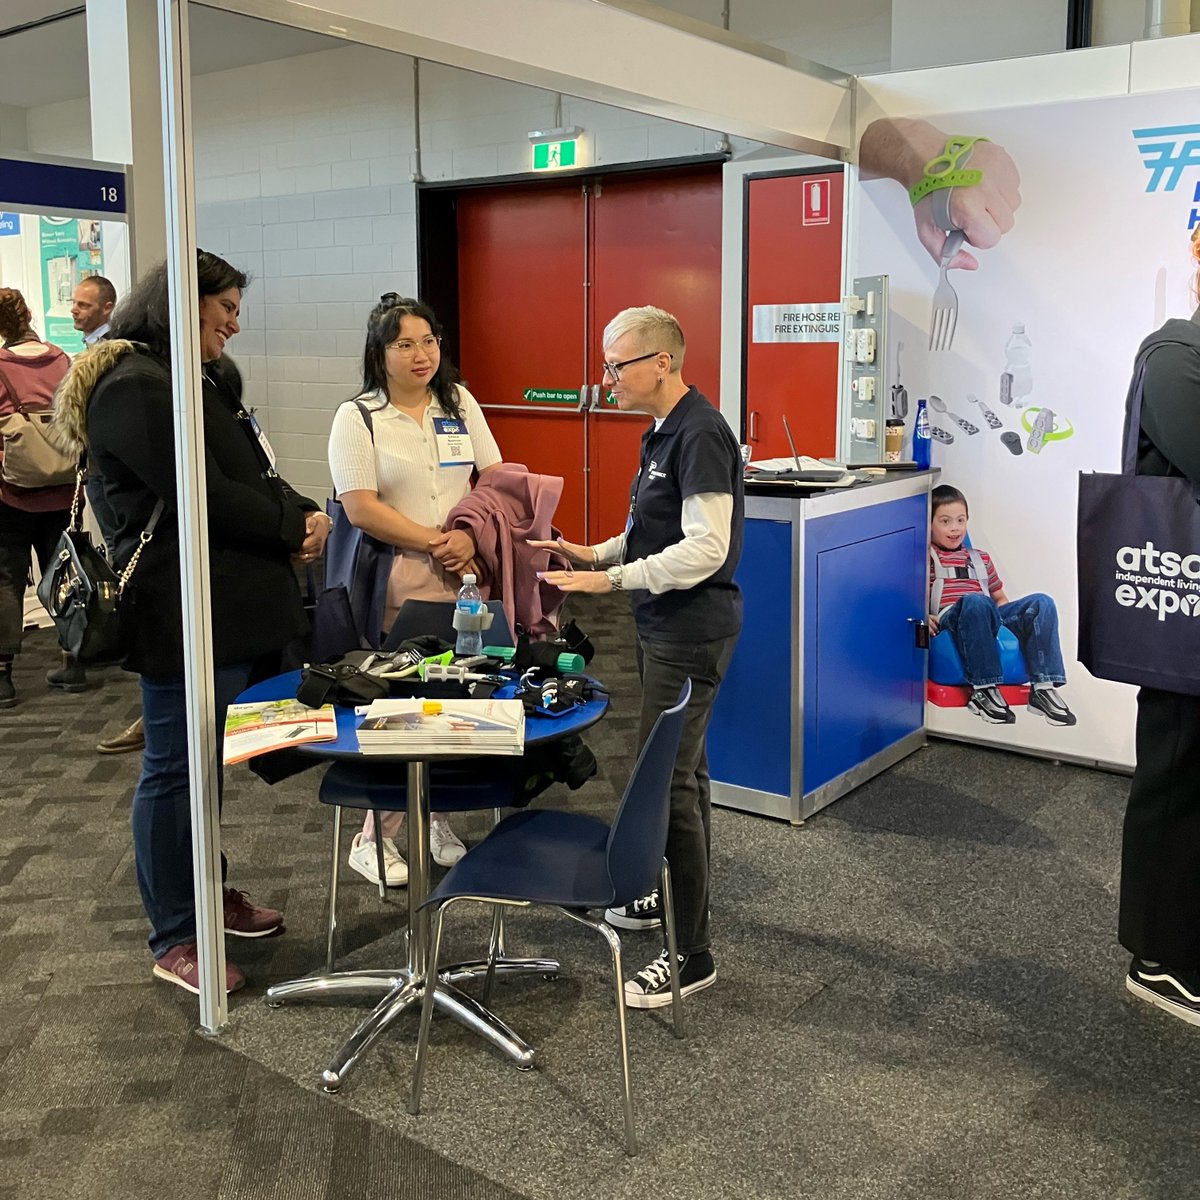 Day 1 of ATSA Independent Living Expo has commenced-Find us at Stand 62!  Some great independent living solutions on display include: Tactee, Active Hands, ELISpoon, Homecraft Daily Living Aids, & cura1 range. #ATSAExpo #PerformanceHealth #ndis #ndisprovider #disabilityawareness